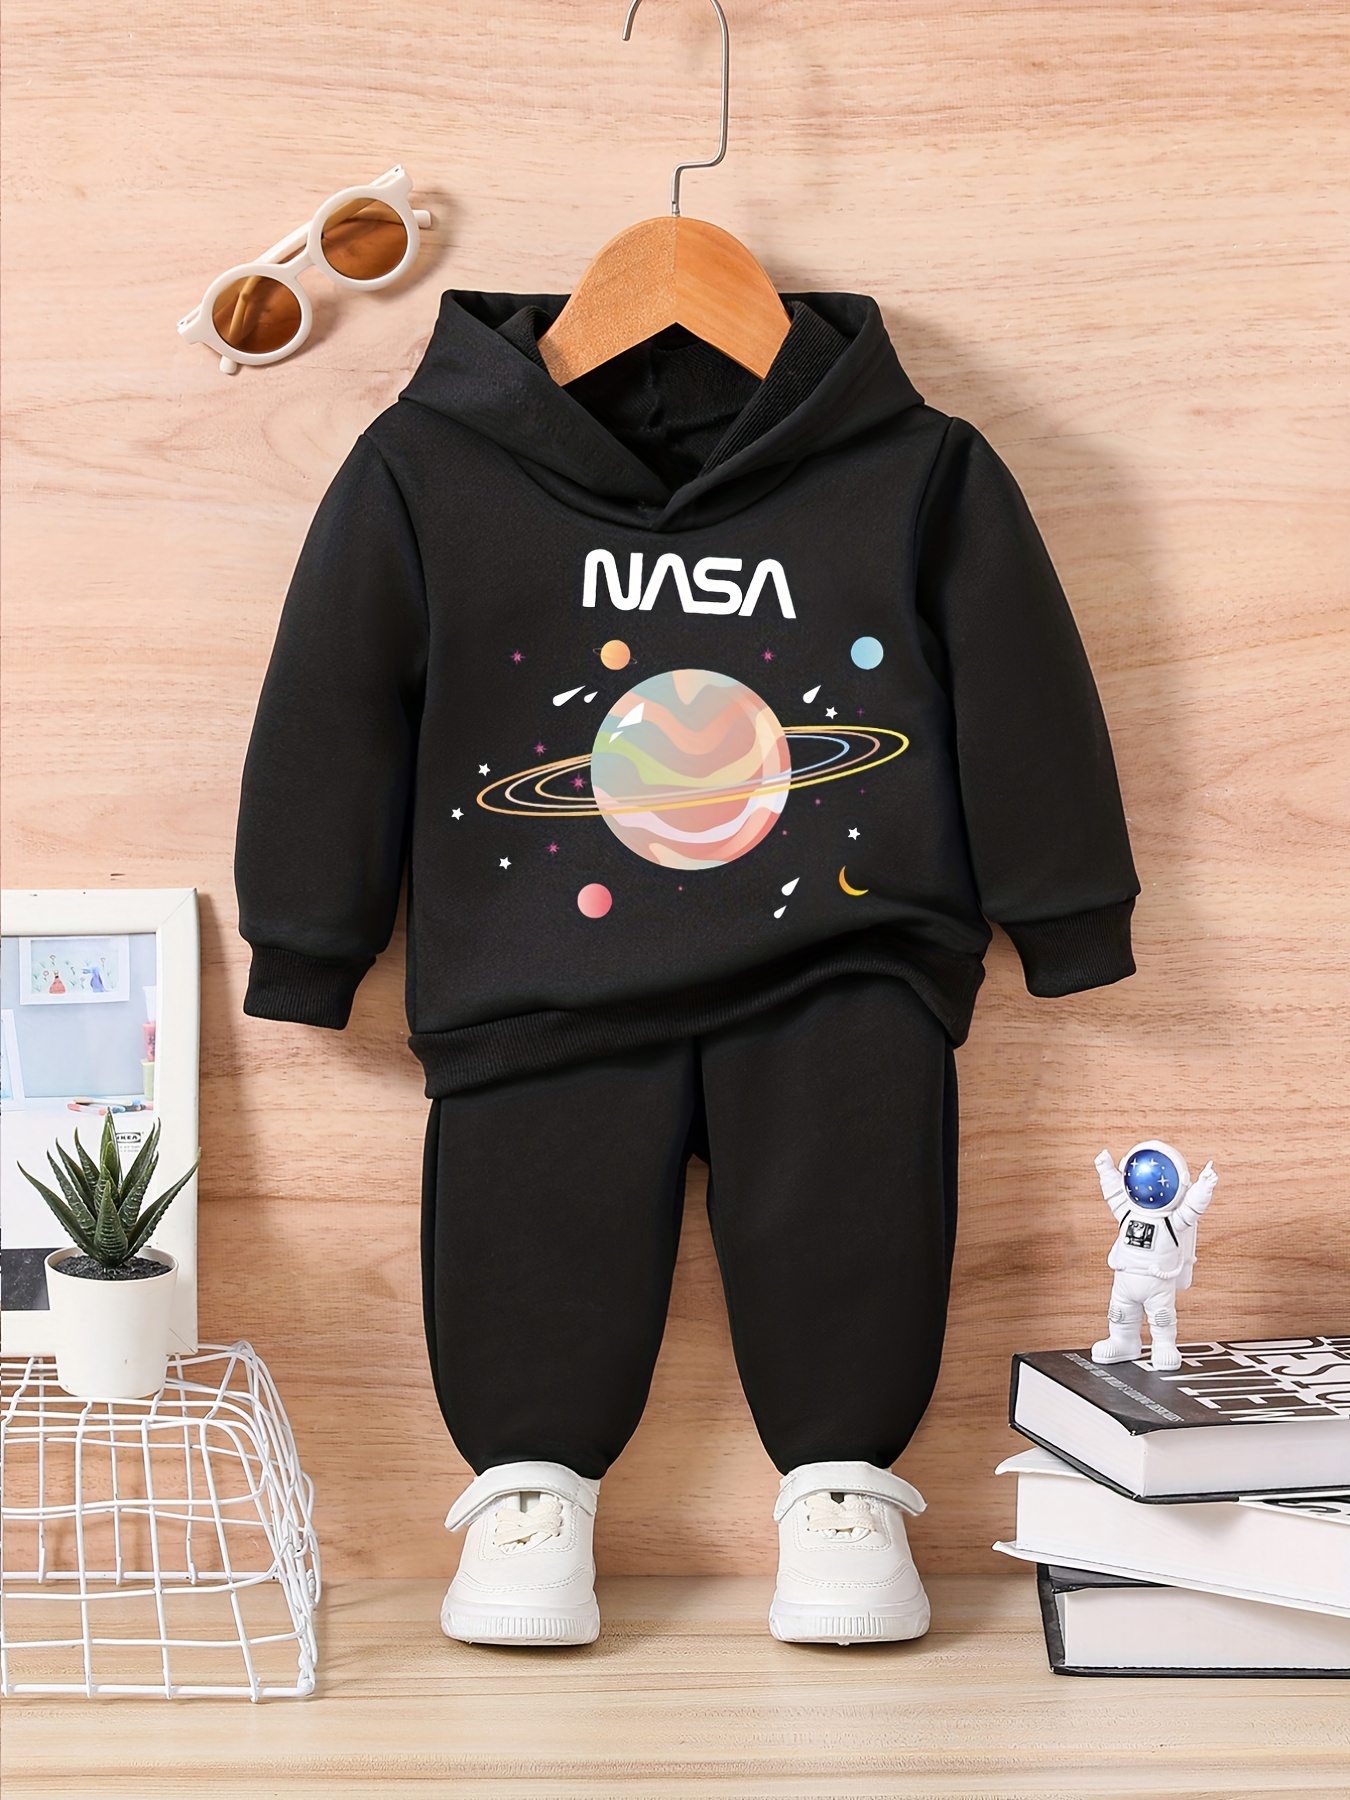 6M to 4 Years Astronaut Clothes Baby Kids Rompers Boys Girls Jumpsuit  Winter Warm Cool Space Suit Children Birthday Gift